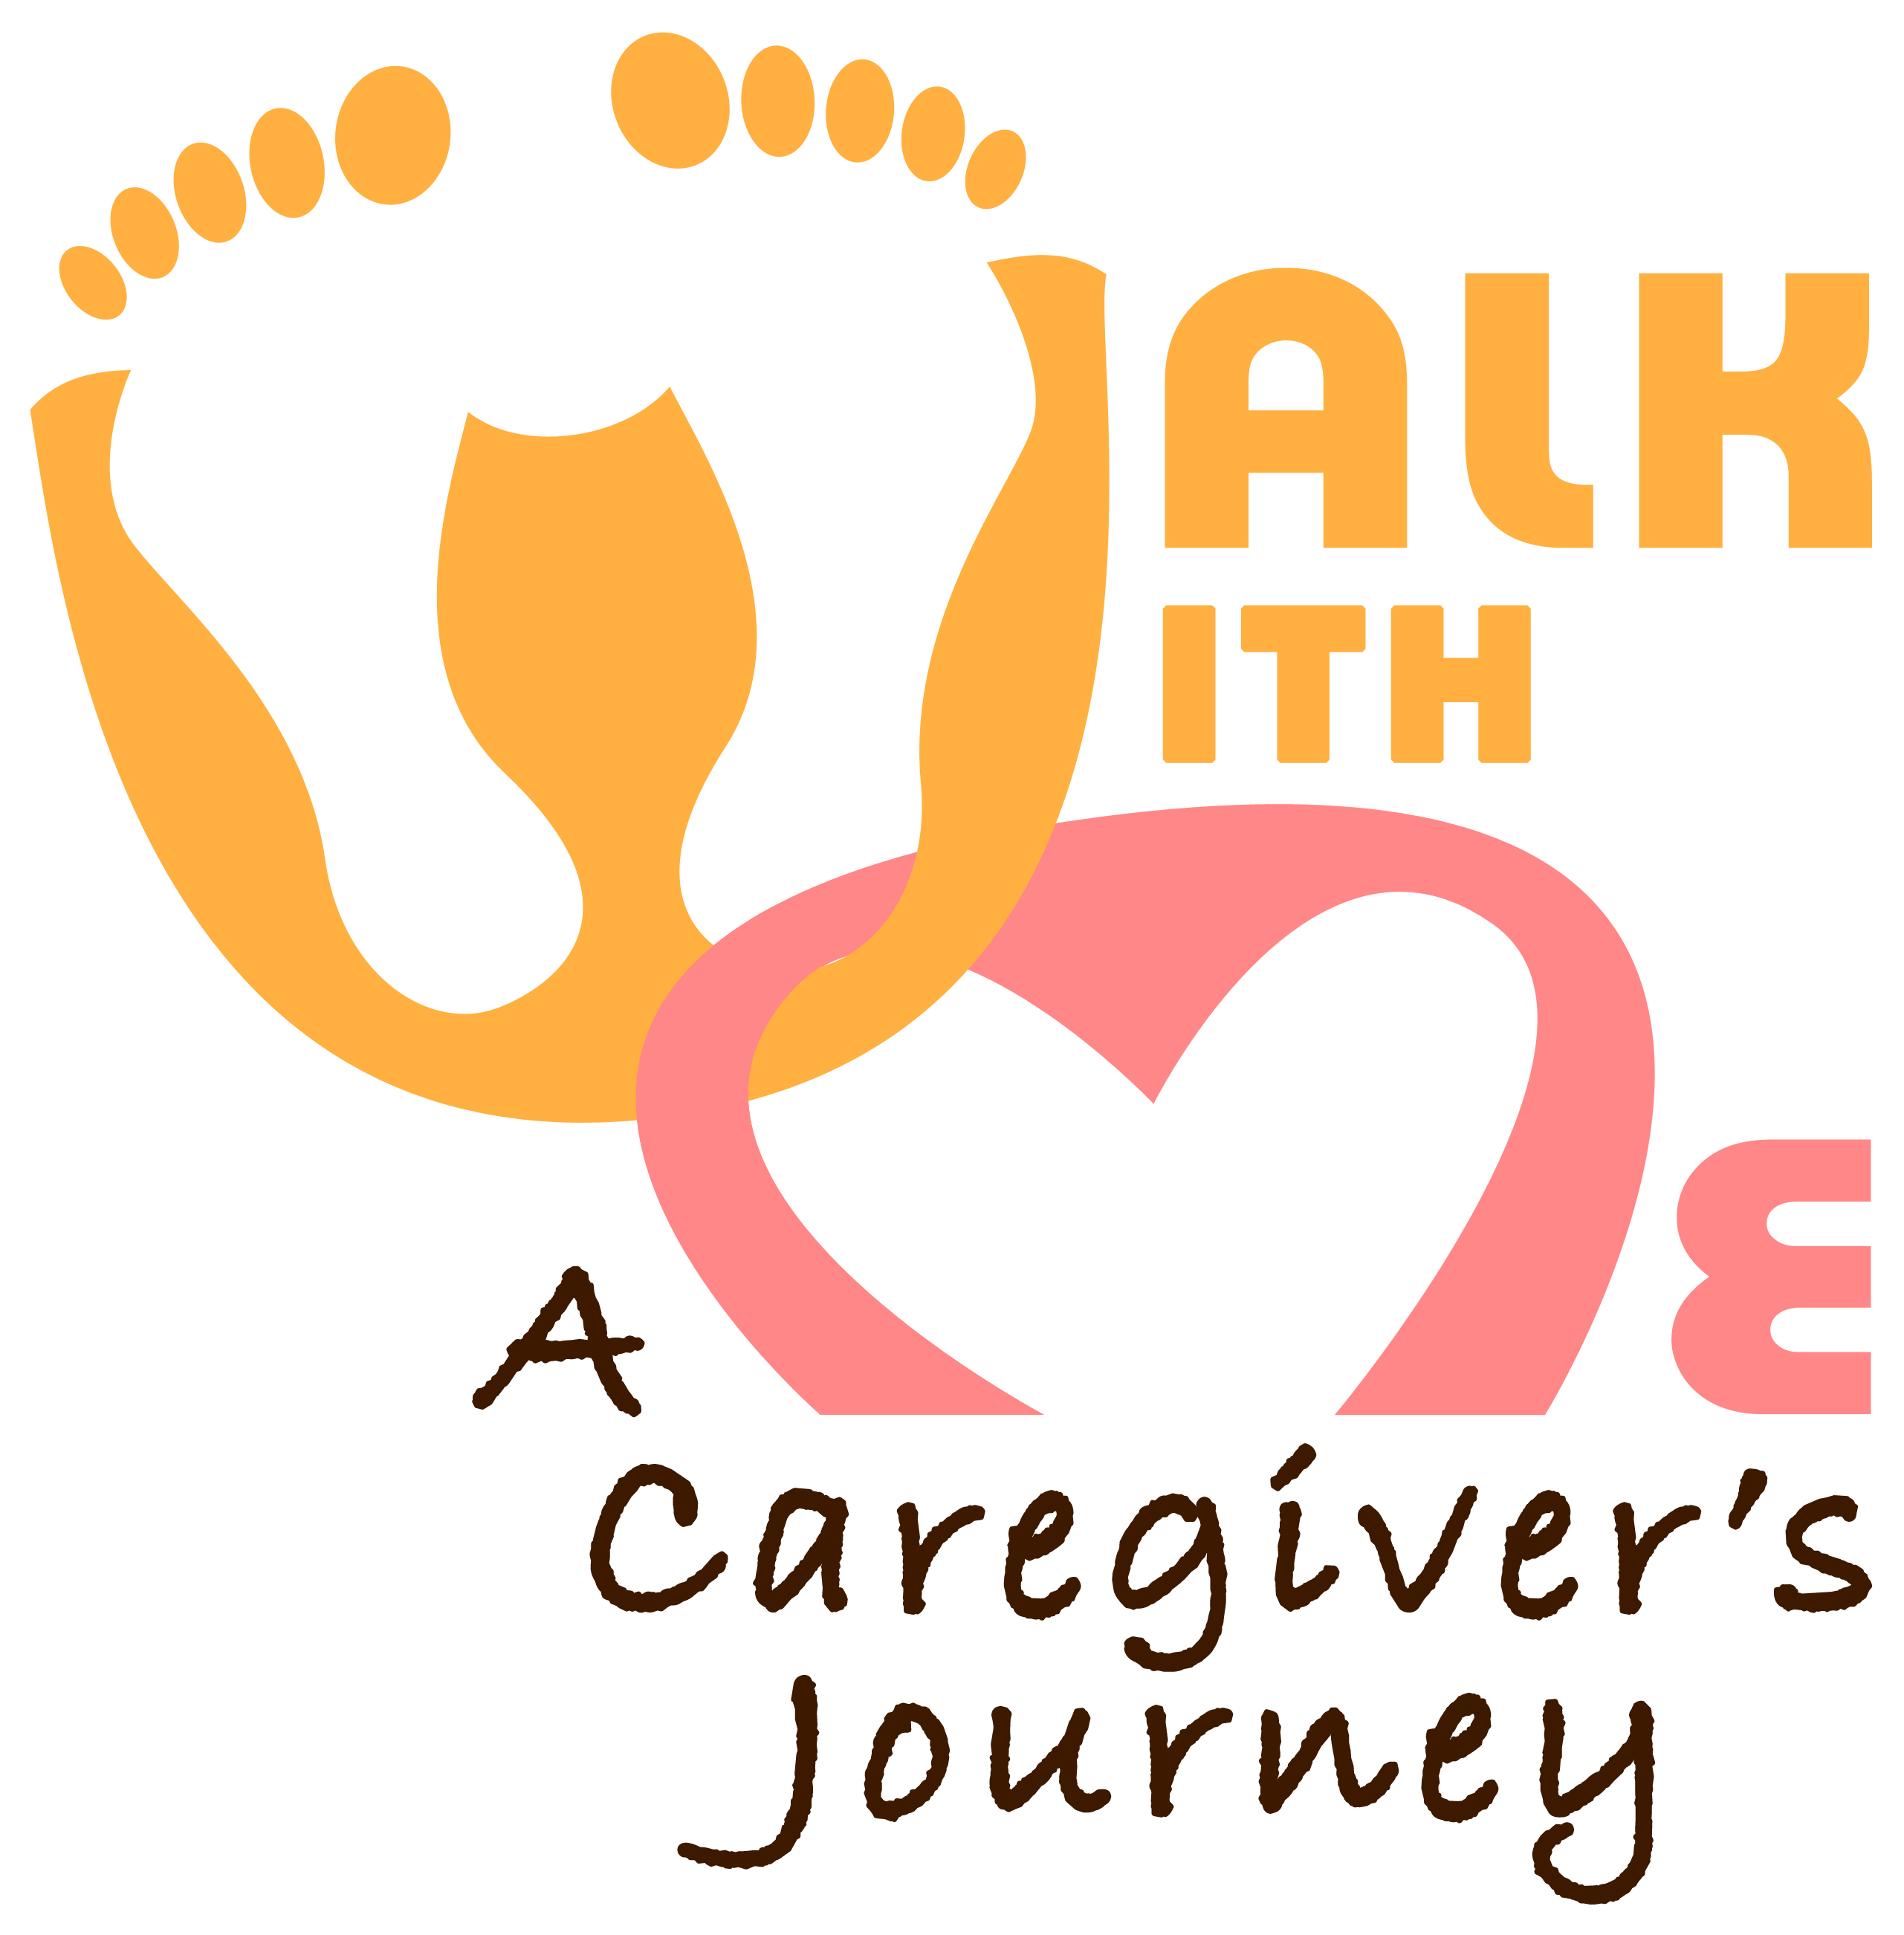 Caregiver Logo - Welcome on the journey of caregiving. Walk With Me